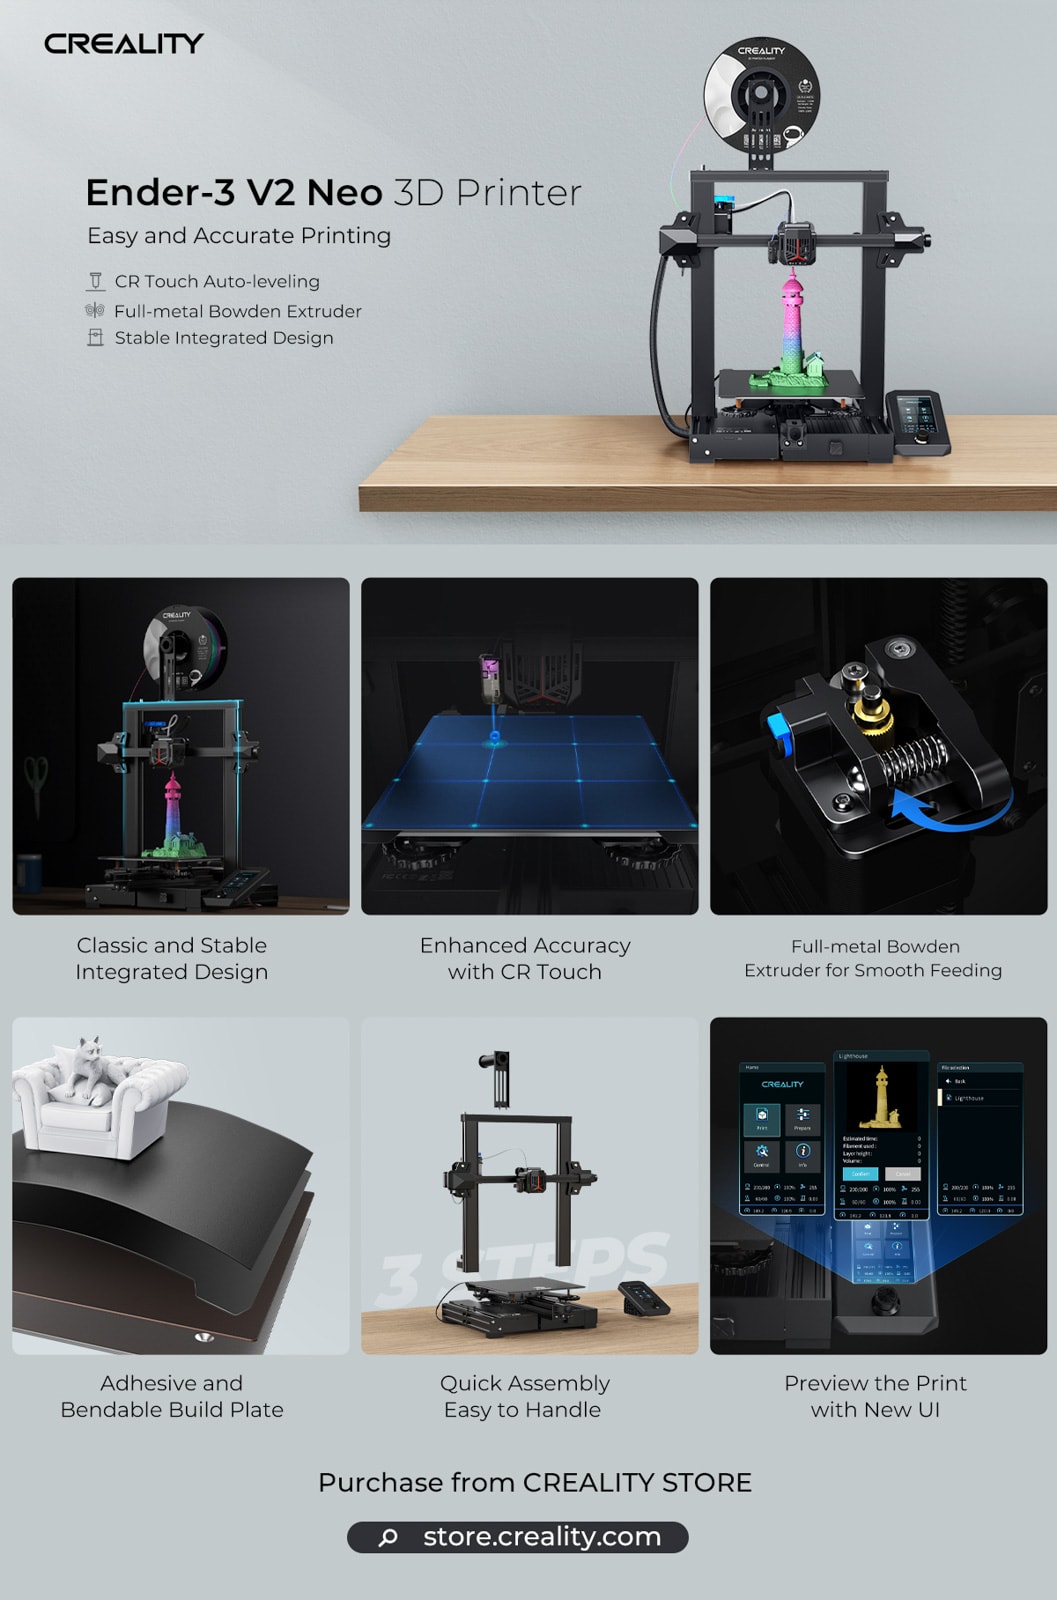 An overview of the features of the Ender-3 V2 Neo 3D printer